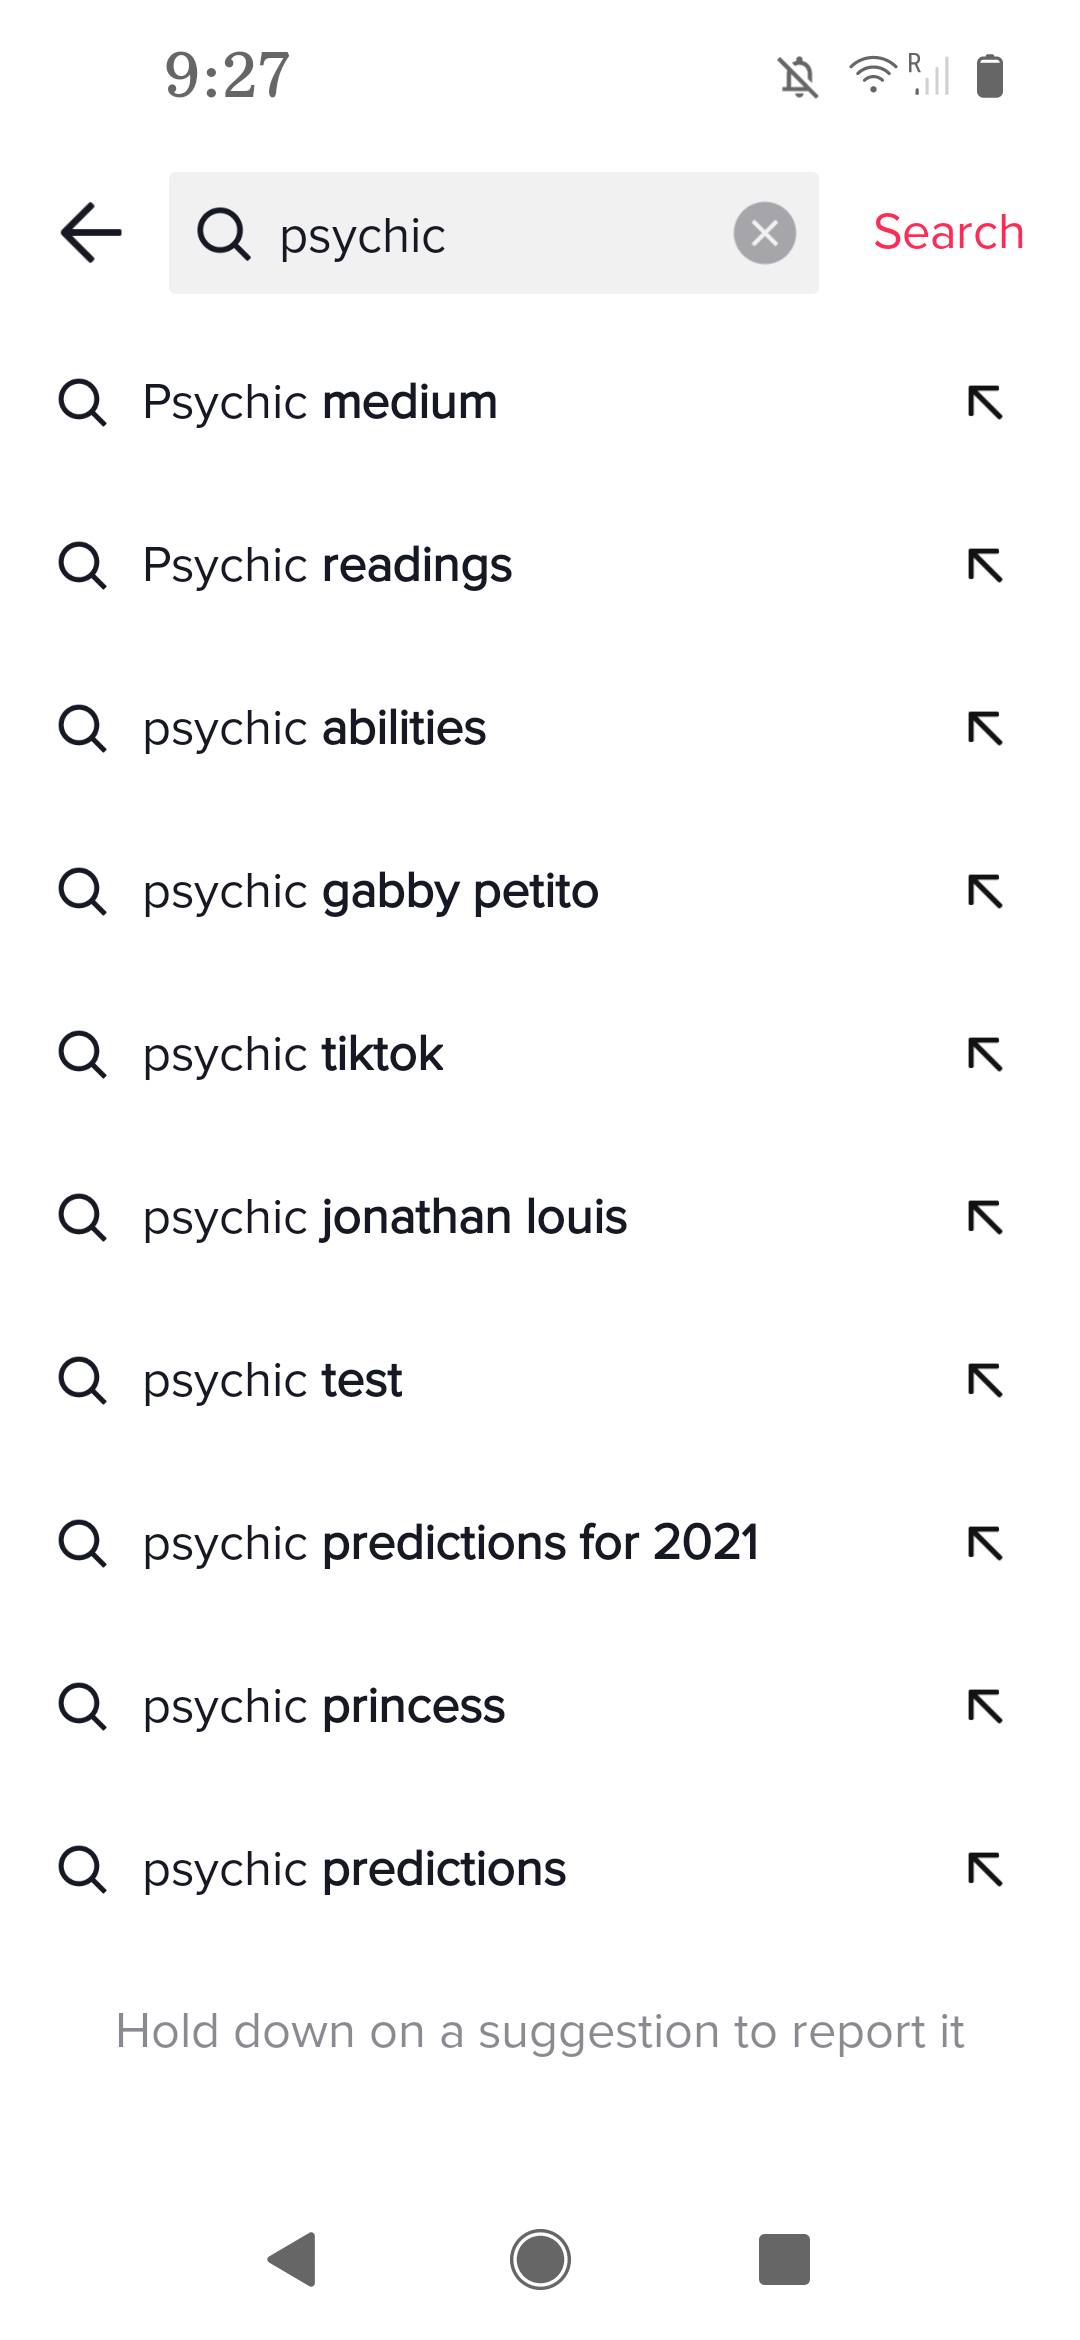 a screenshot demonstrating the Tik Tok algorithm auto-completing "Gabby Petito" in searches for psychics